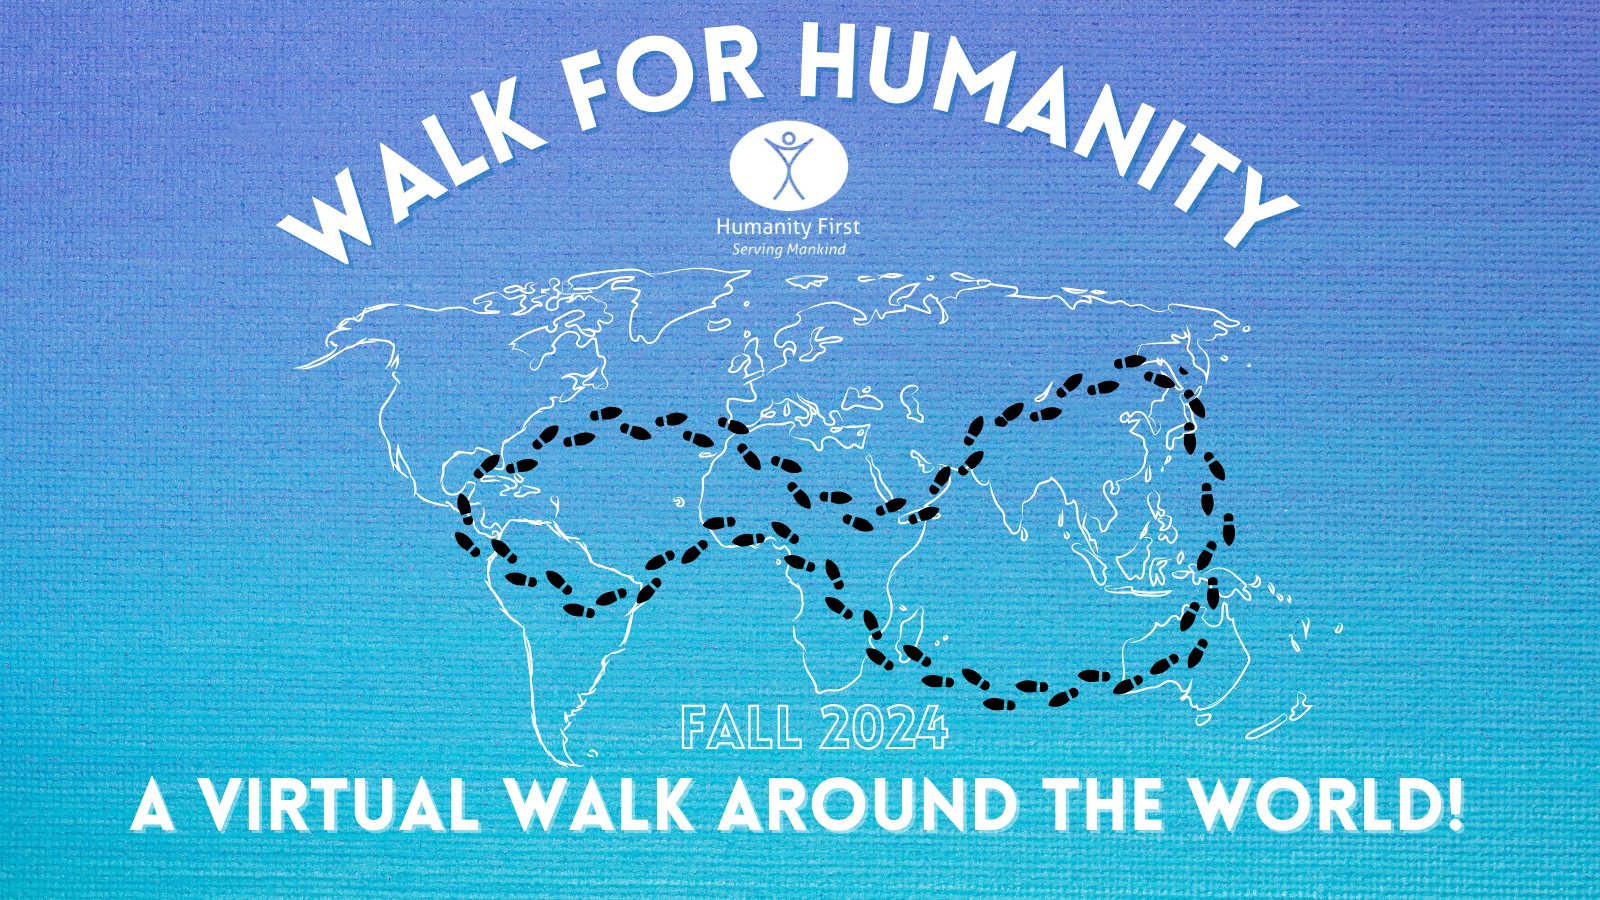 A map of the world with a circular route of footprints mapped across it. At the top reads Walk for Humanity with the HF logo. Underneath reads Fall 2024 A Virtual Walk Around the World.